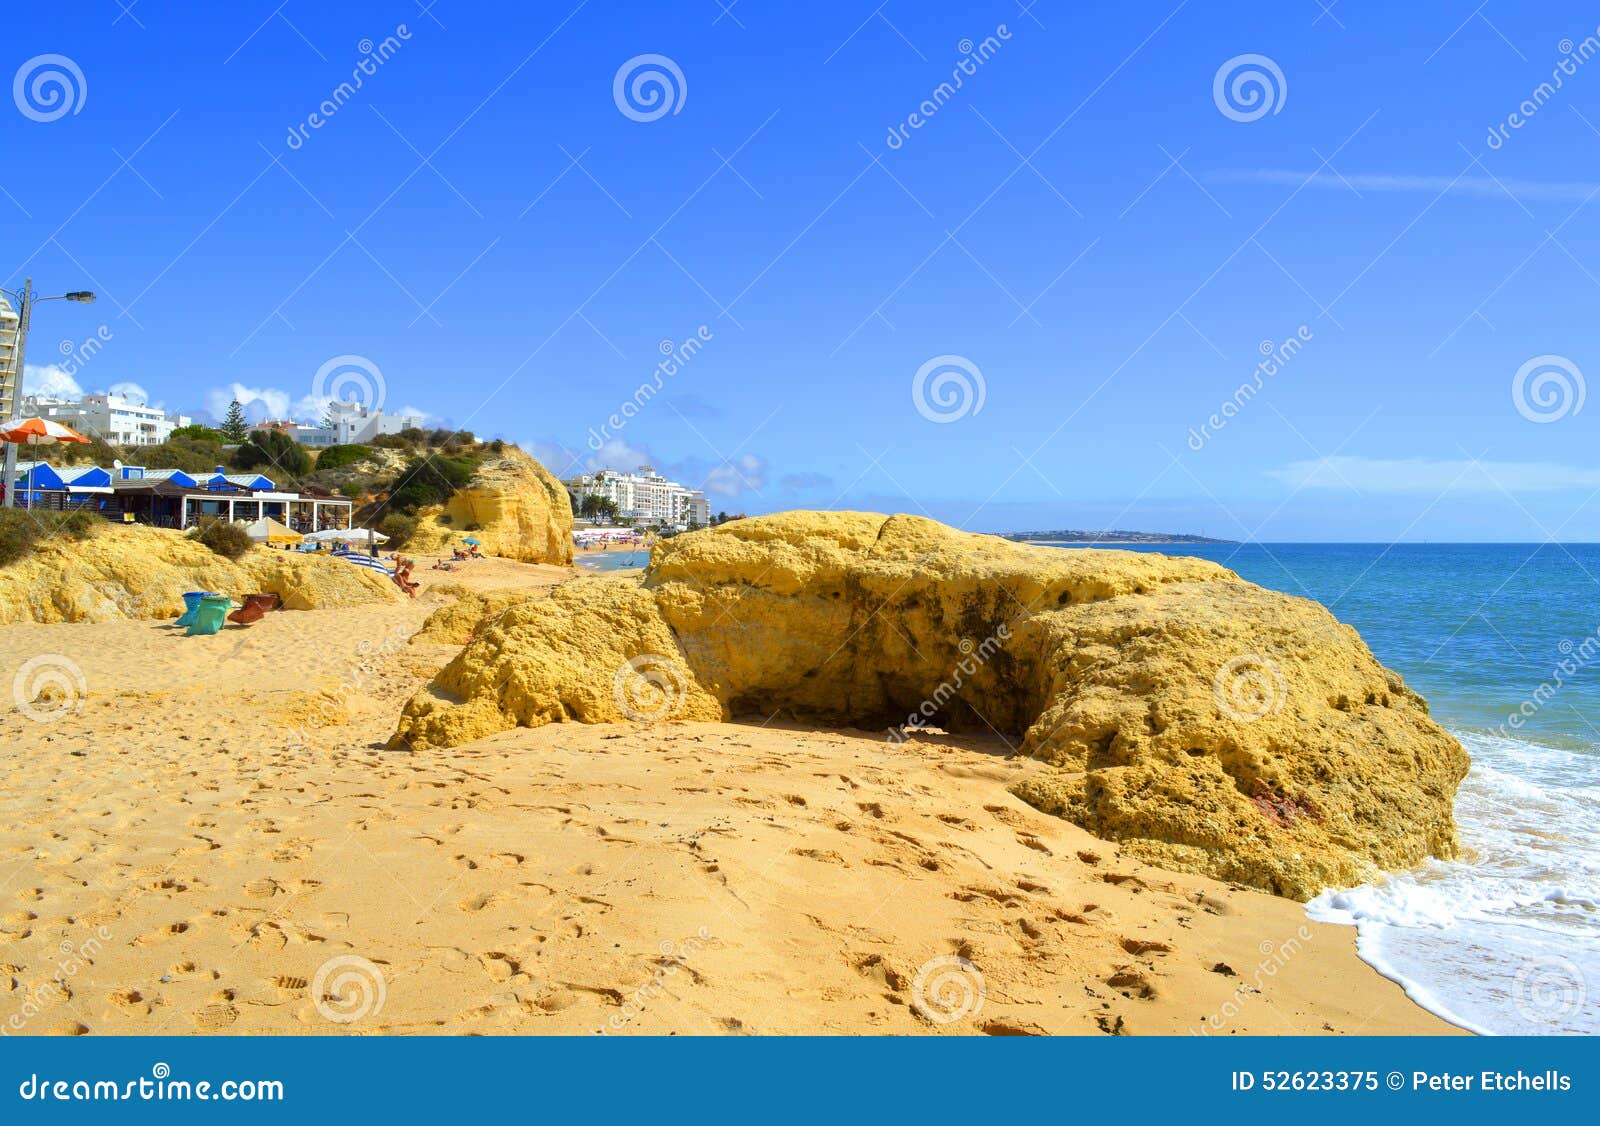 Vale Do Olival Beach Rock Formation Stock Image Image Of Mediterranean Male 52623375